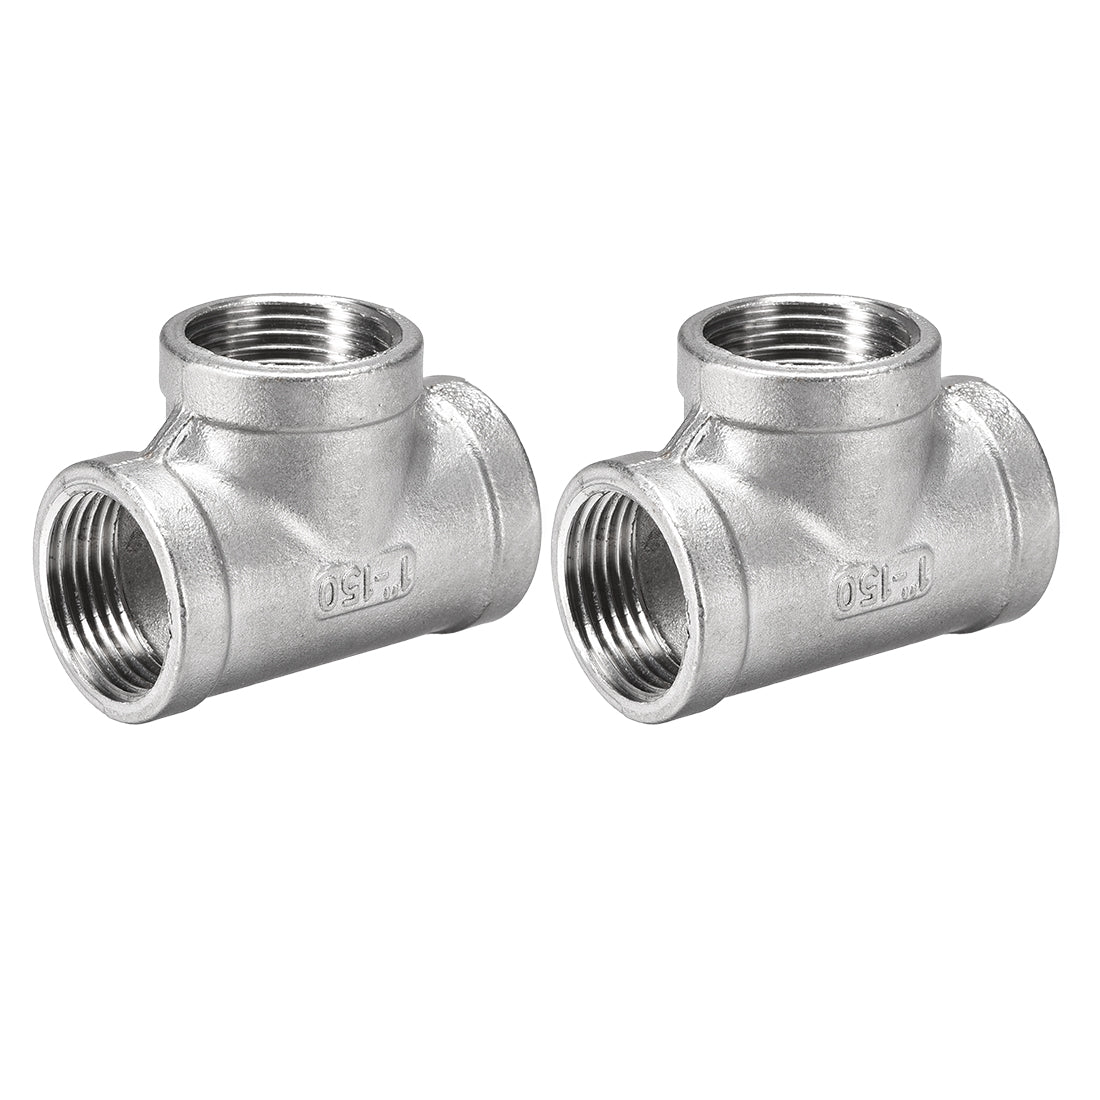 uxcell Uxcell Stainless Steel 304 Cast  Pipe Fitting 1 BSPT Female Thread Class 150 Tee Shaped Connector Coupler 2pcs